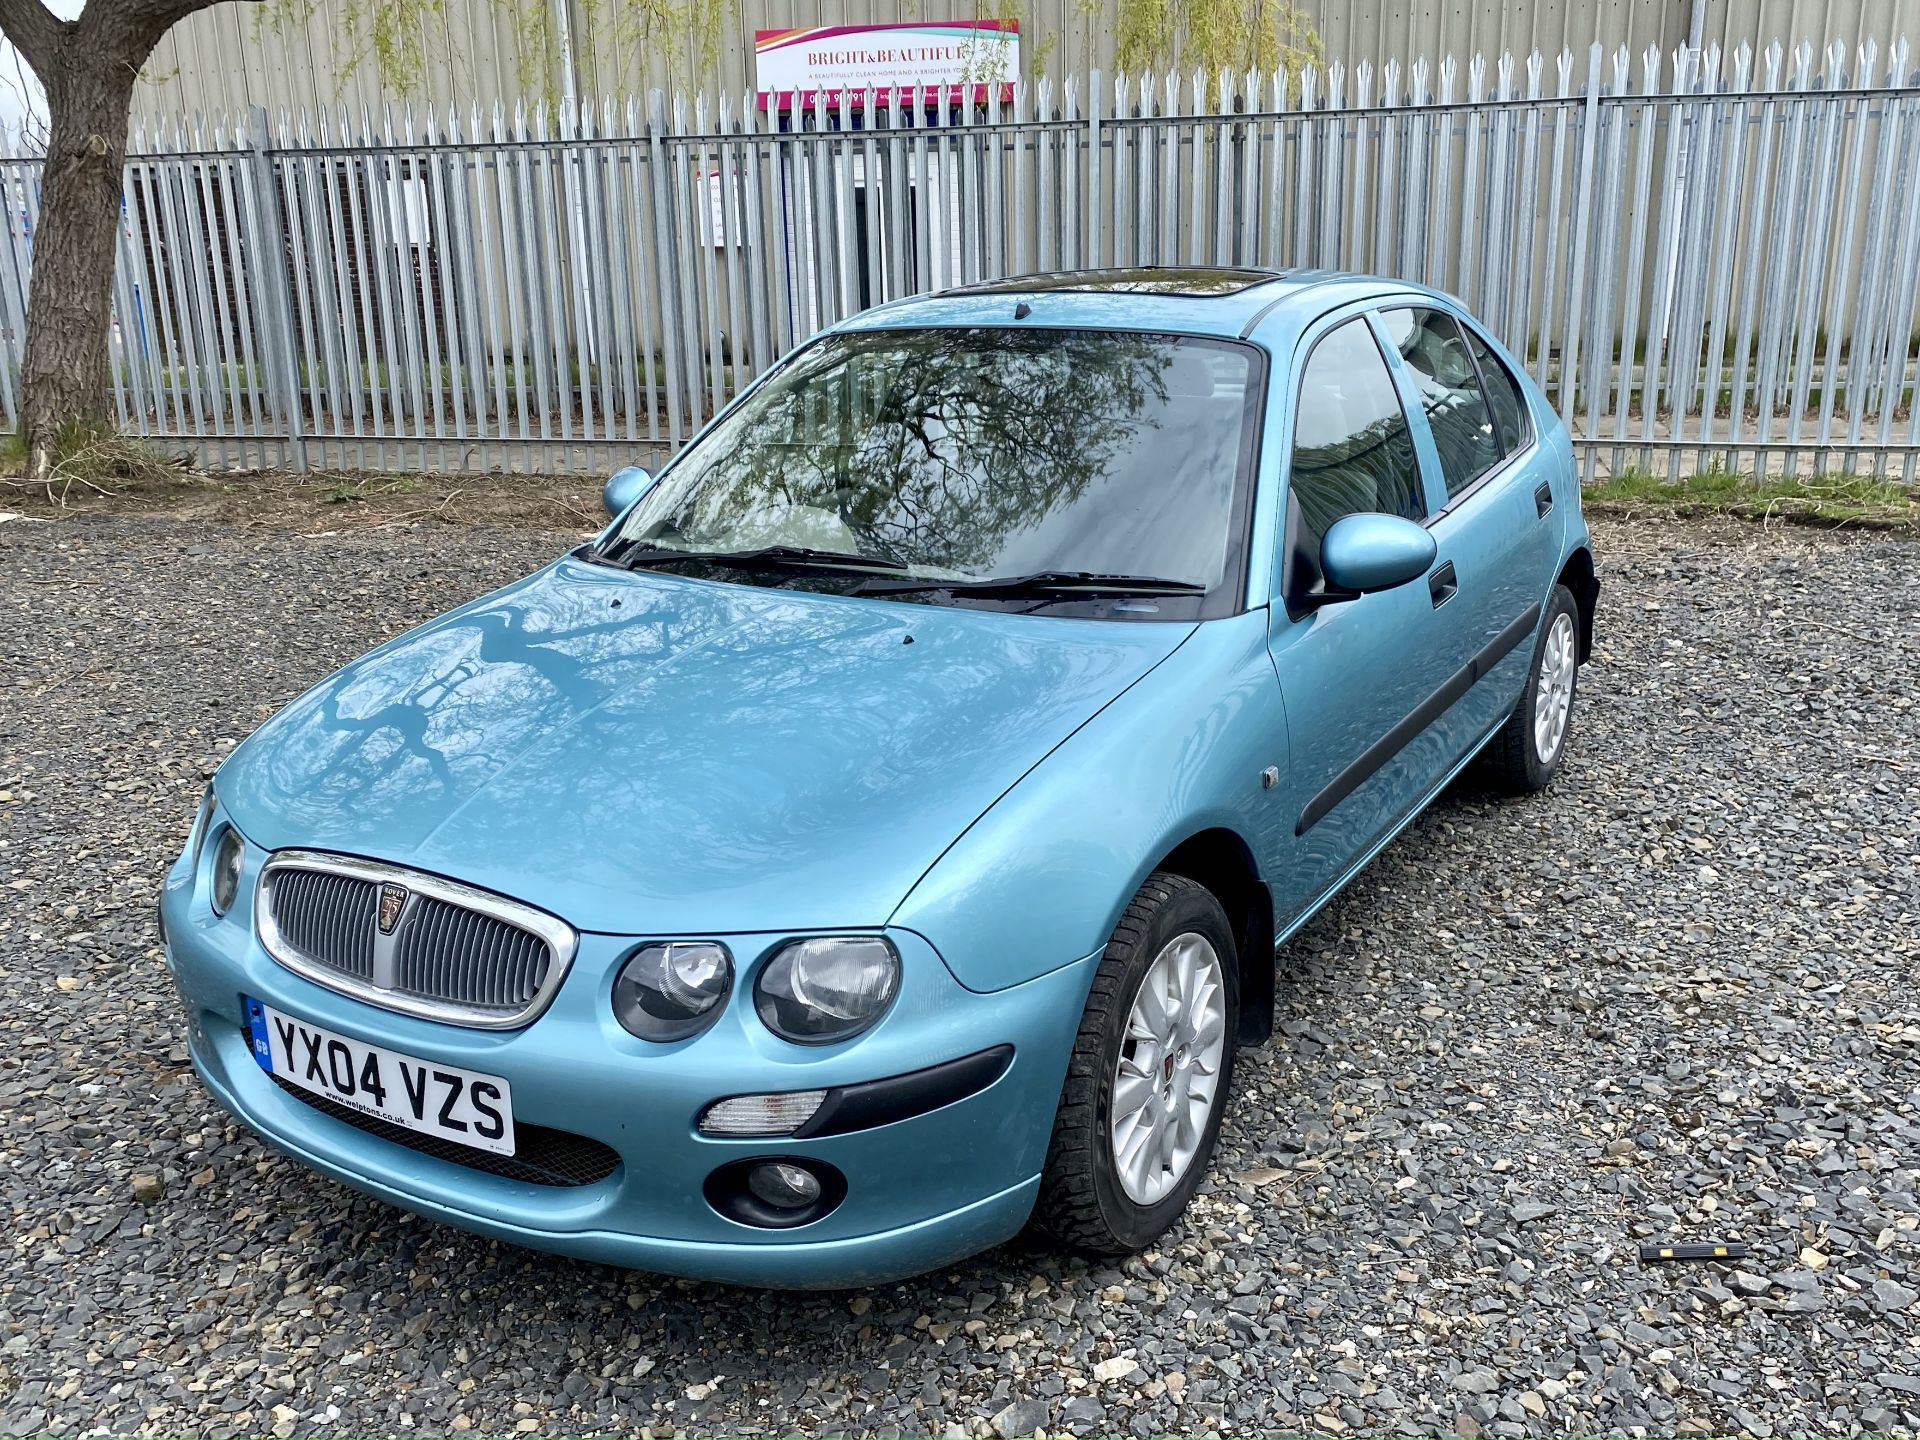 Rover 25 - Image 11 of 36